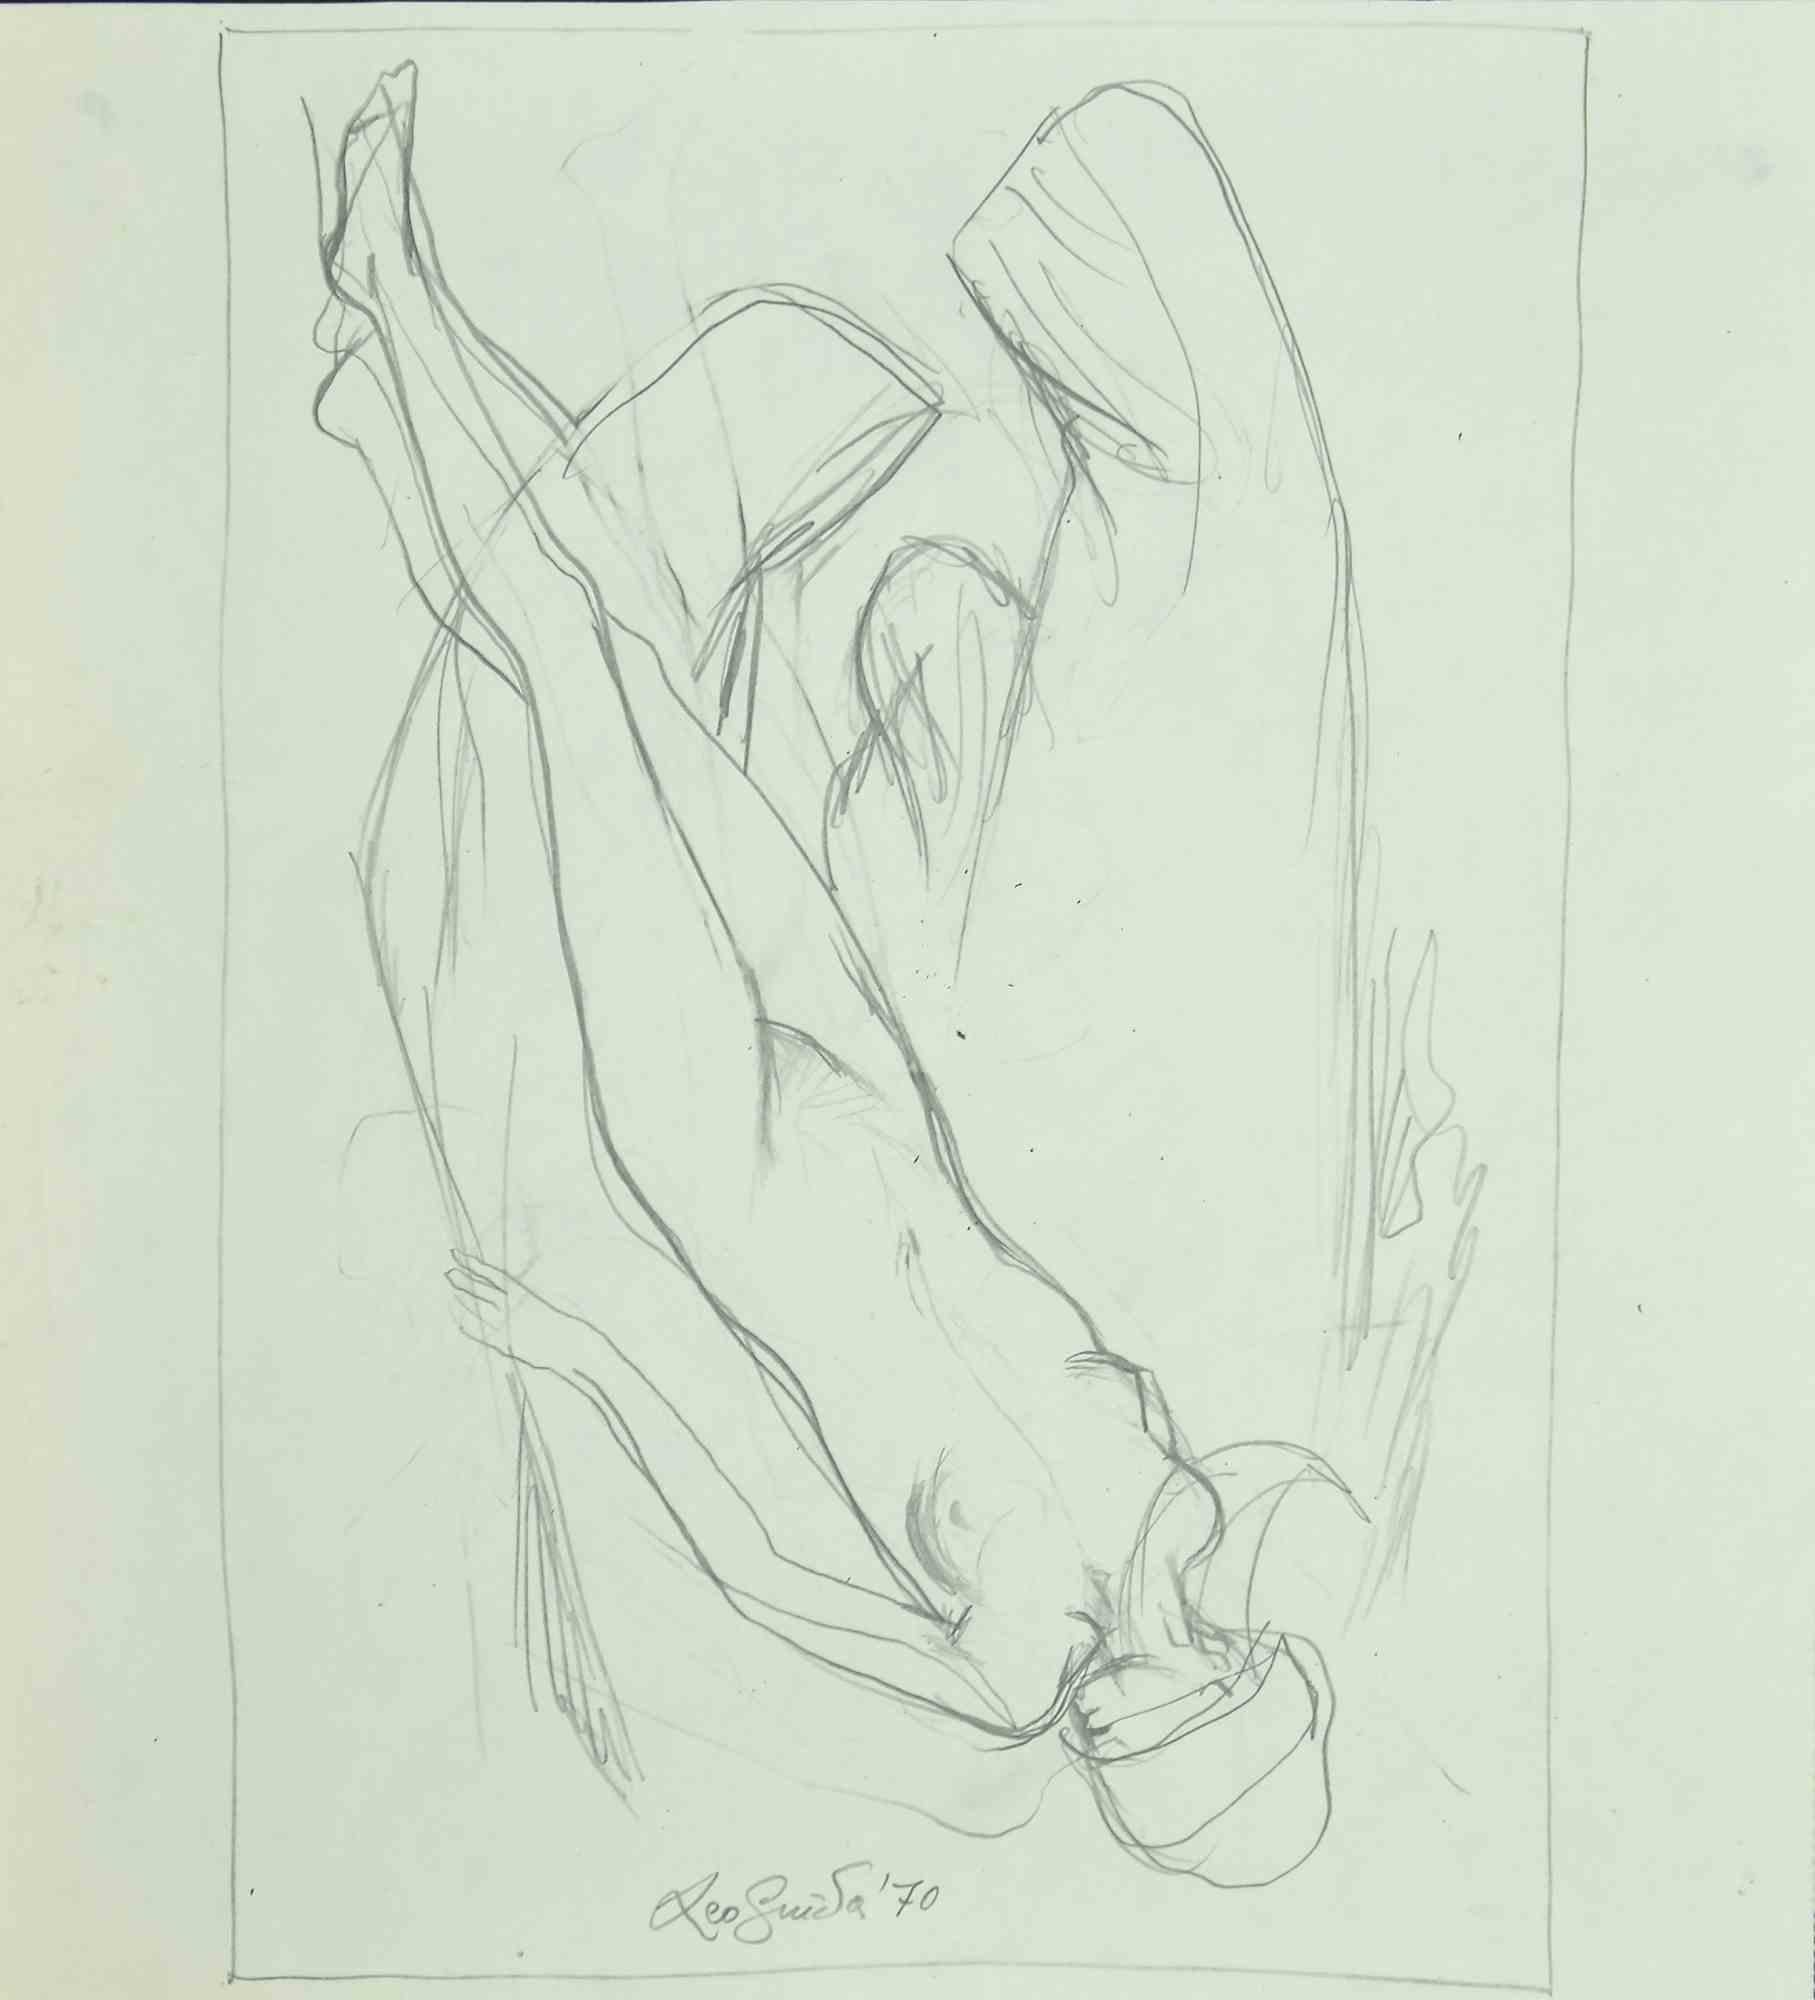 Nude is an original artwork realized  in 1970 by the italian Contemporary artist  Leo Guida  (1992 - 2017).

Original pencil drawing on ivory-colored paper.

Hand-signed and dated on the lower margins. 

Excellent conditions. 

Leo Guida  (1992 -